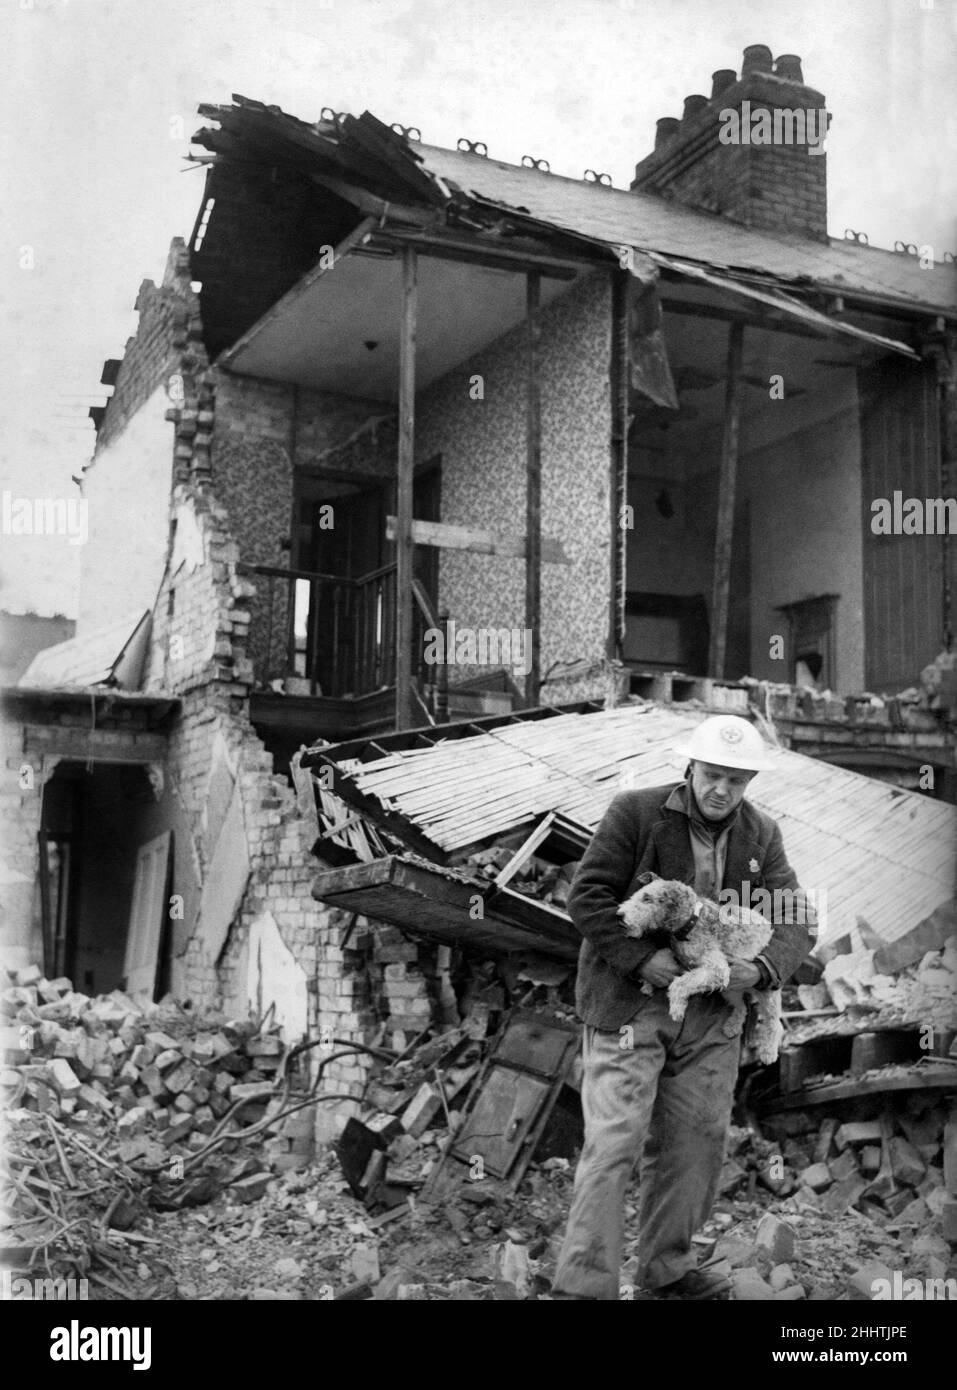 Mr. Sydney Colman tends to an injured wire haired terrier after air raid on north east town (31st March 31). Pictured 4th April 1941.  *** Local Caption *** P002200 Stock Photo